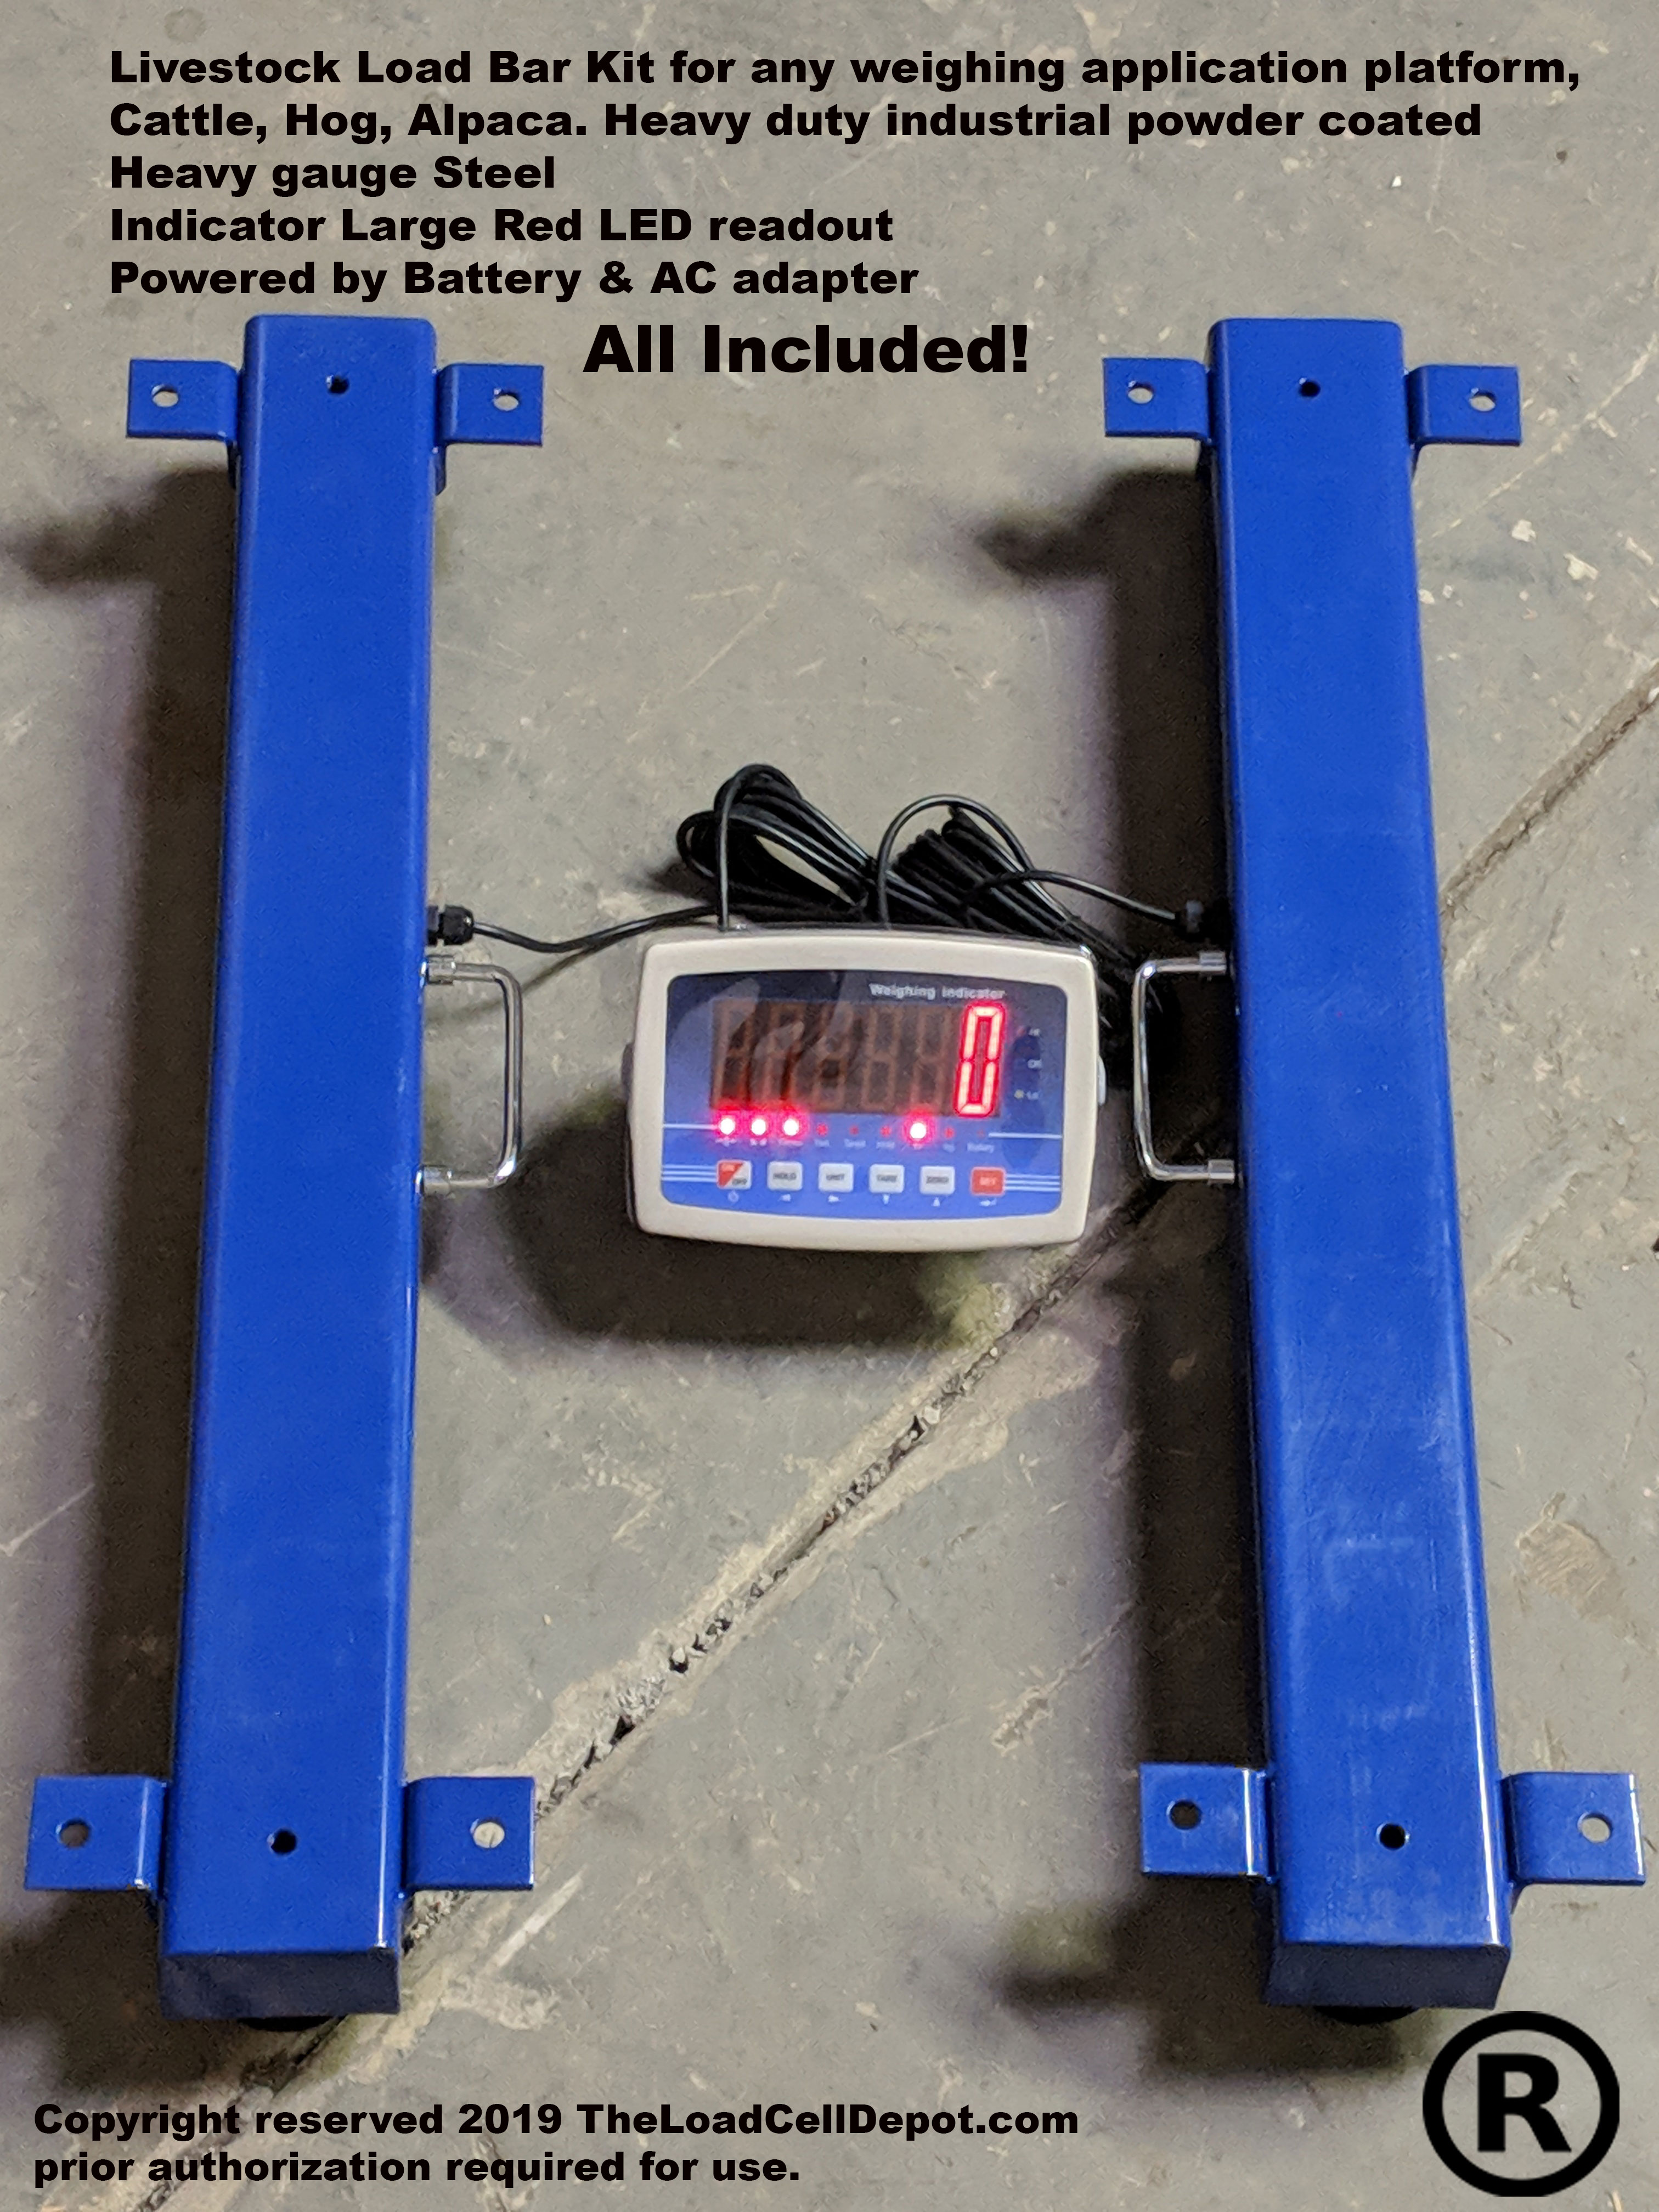 48 Cow|Cattle|Pig|Goat|Horse|Sheep|Hog Weight Checker with Accurate Digital Indicator PEC Livestock Weigh Bar Set for Farm Animal Weighing